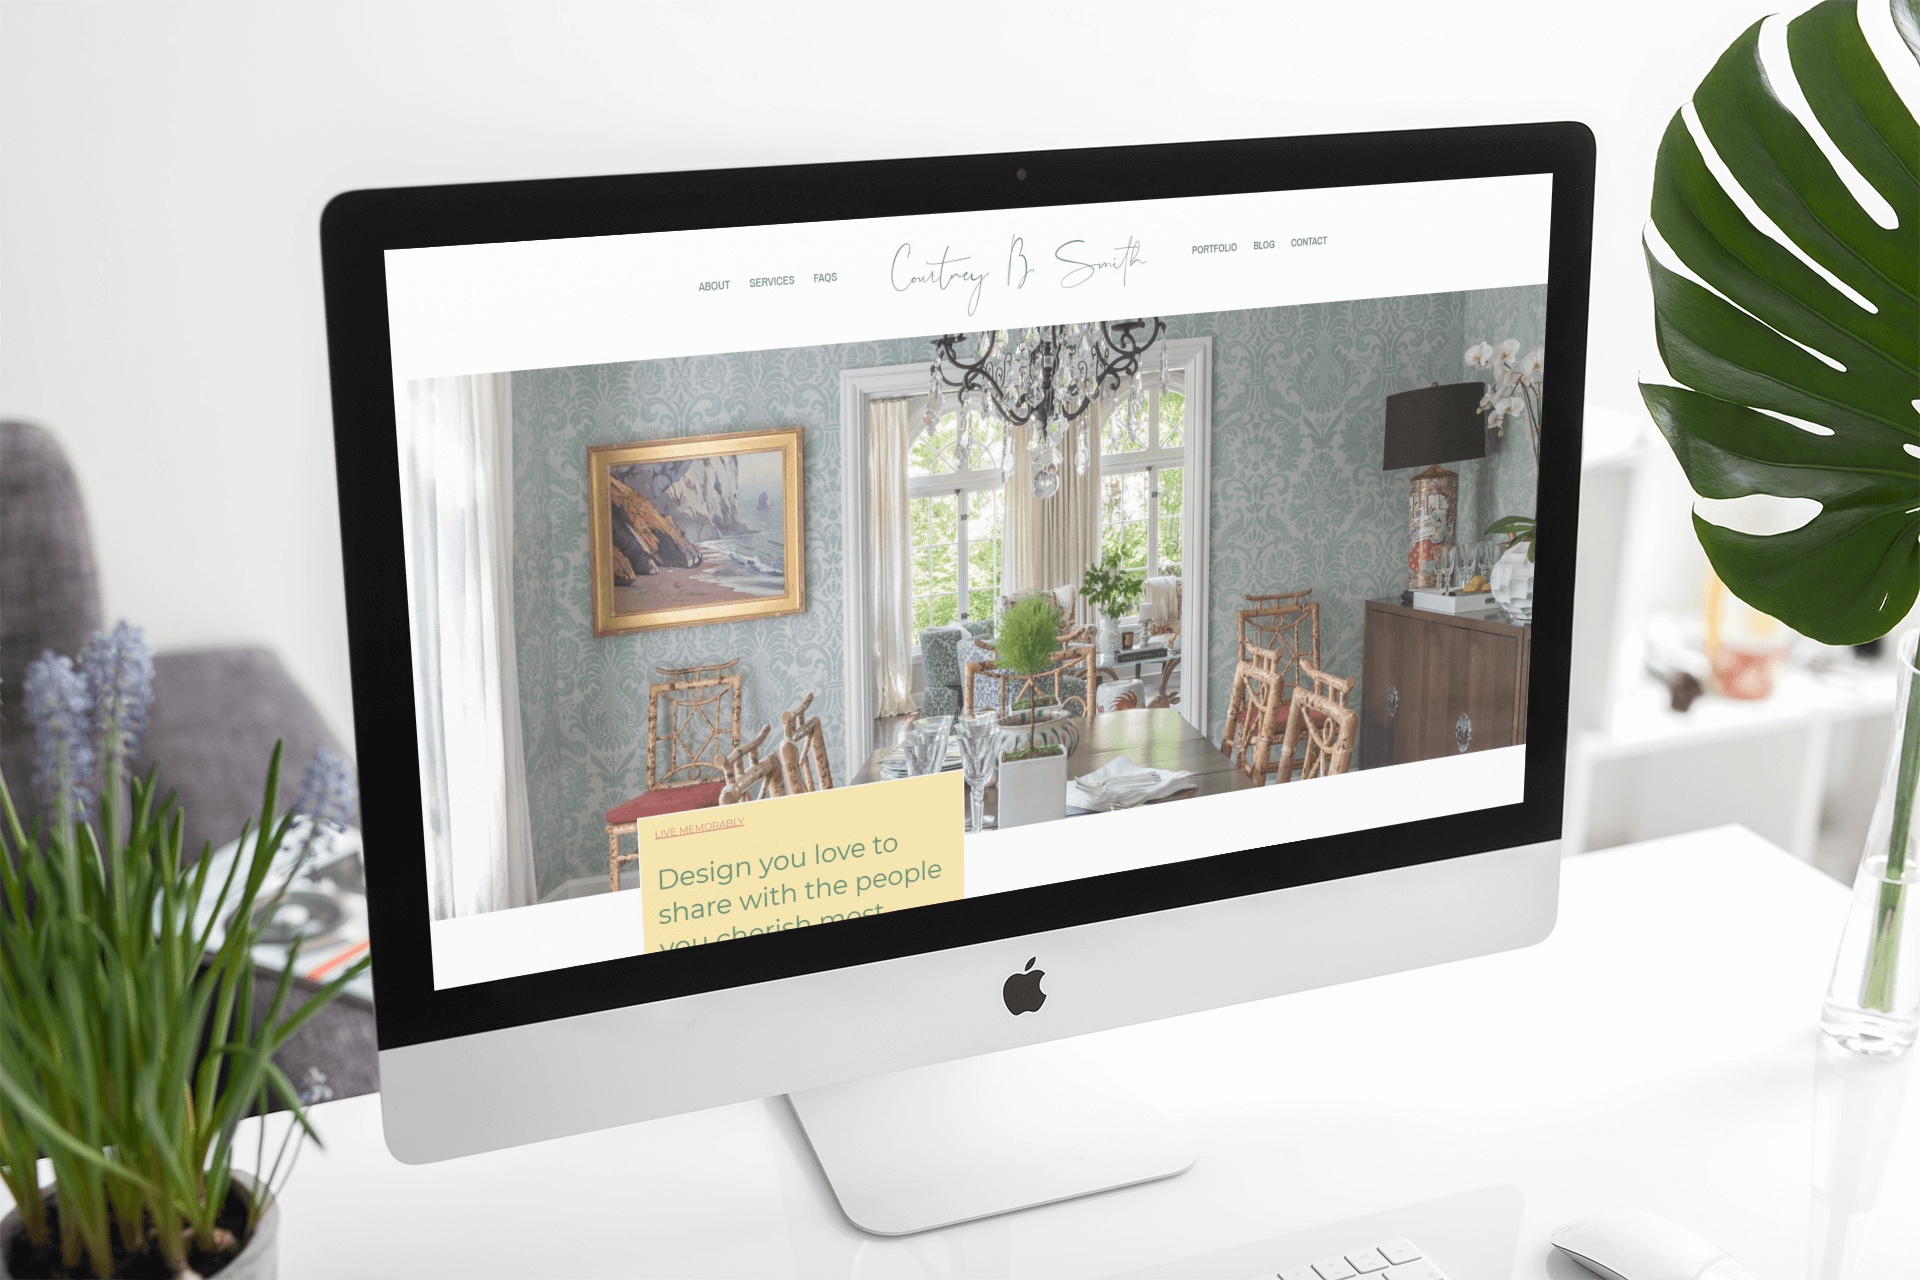 courtney b smith interior design website in a day.png